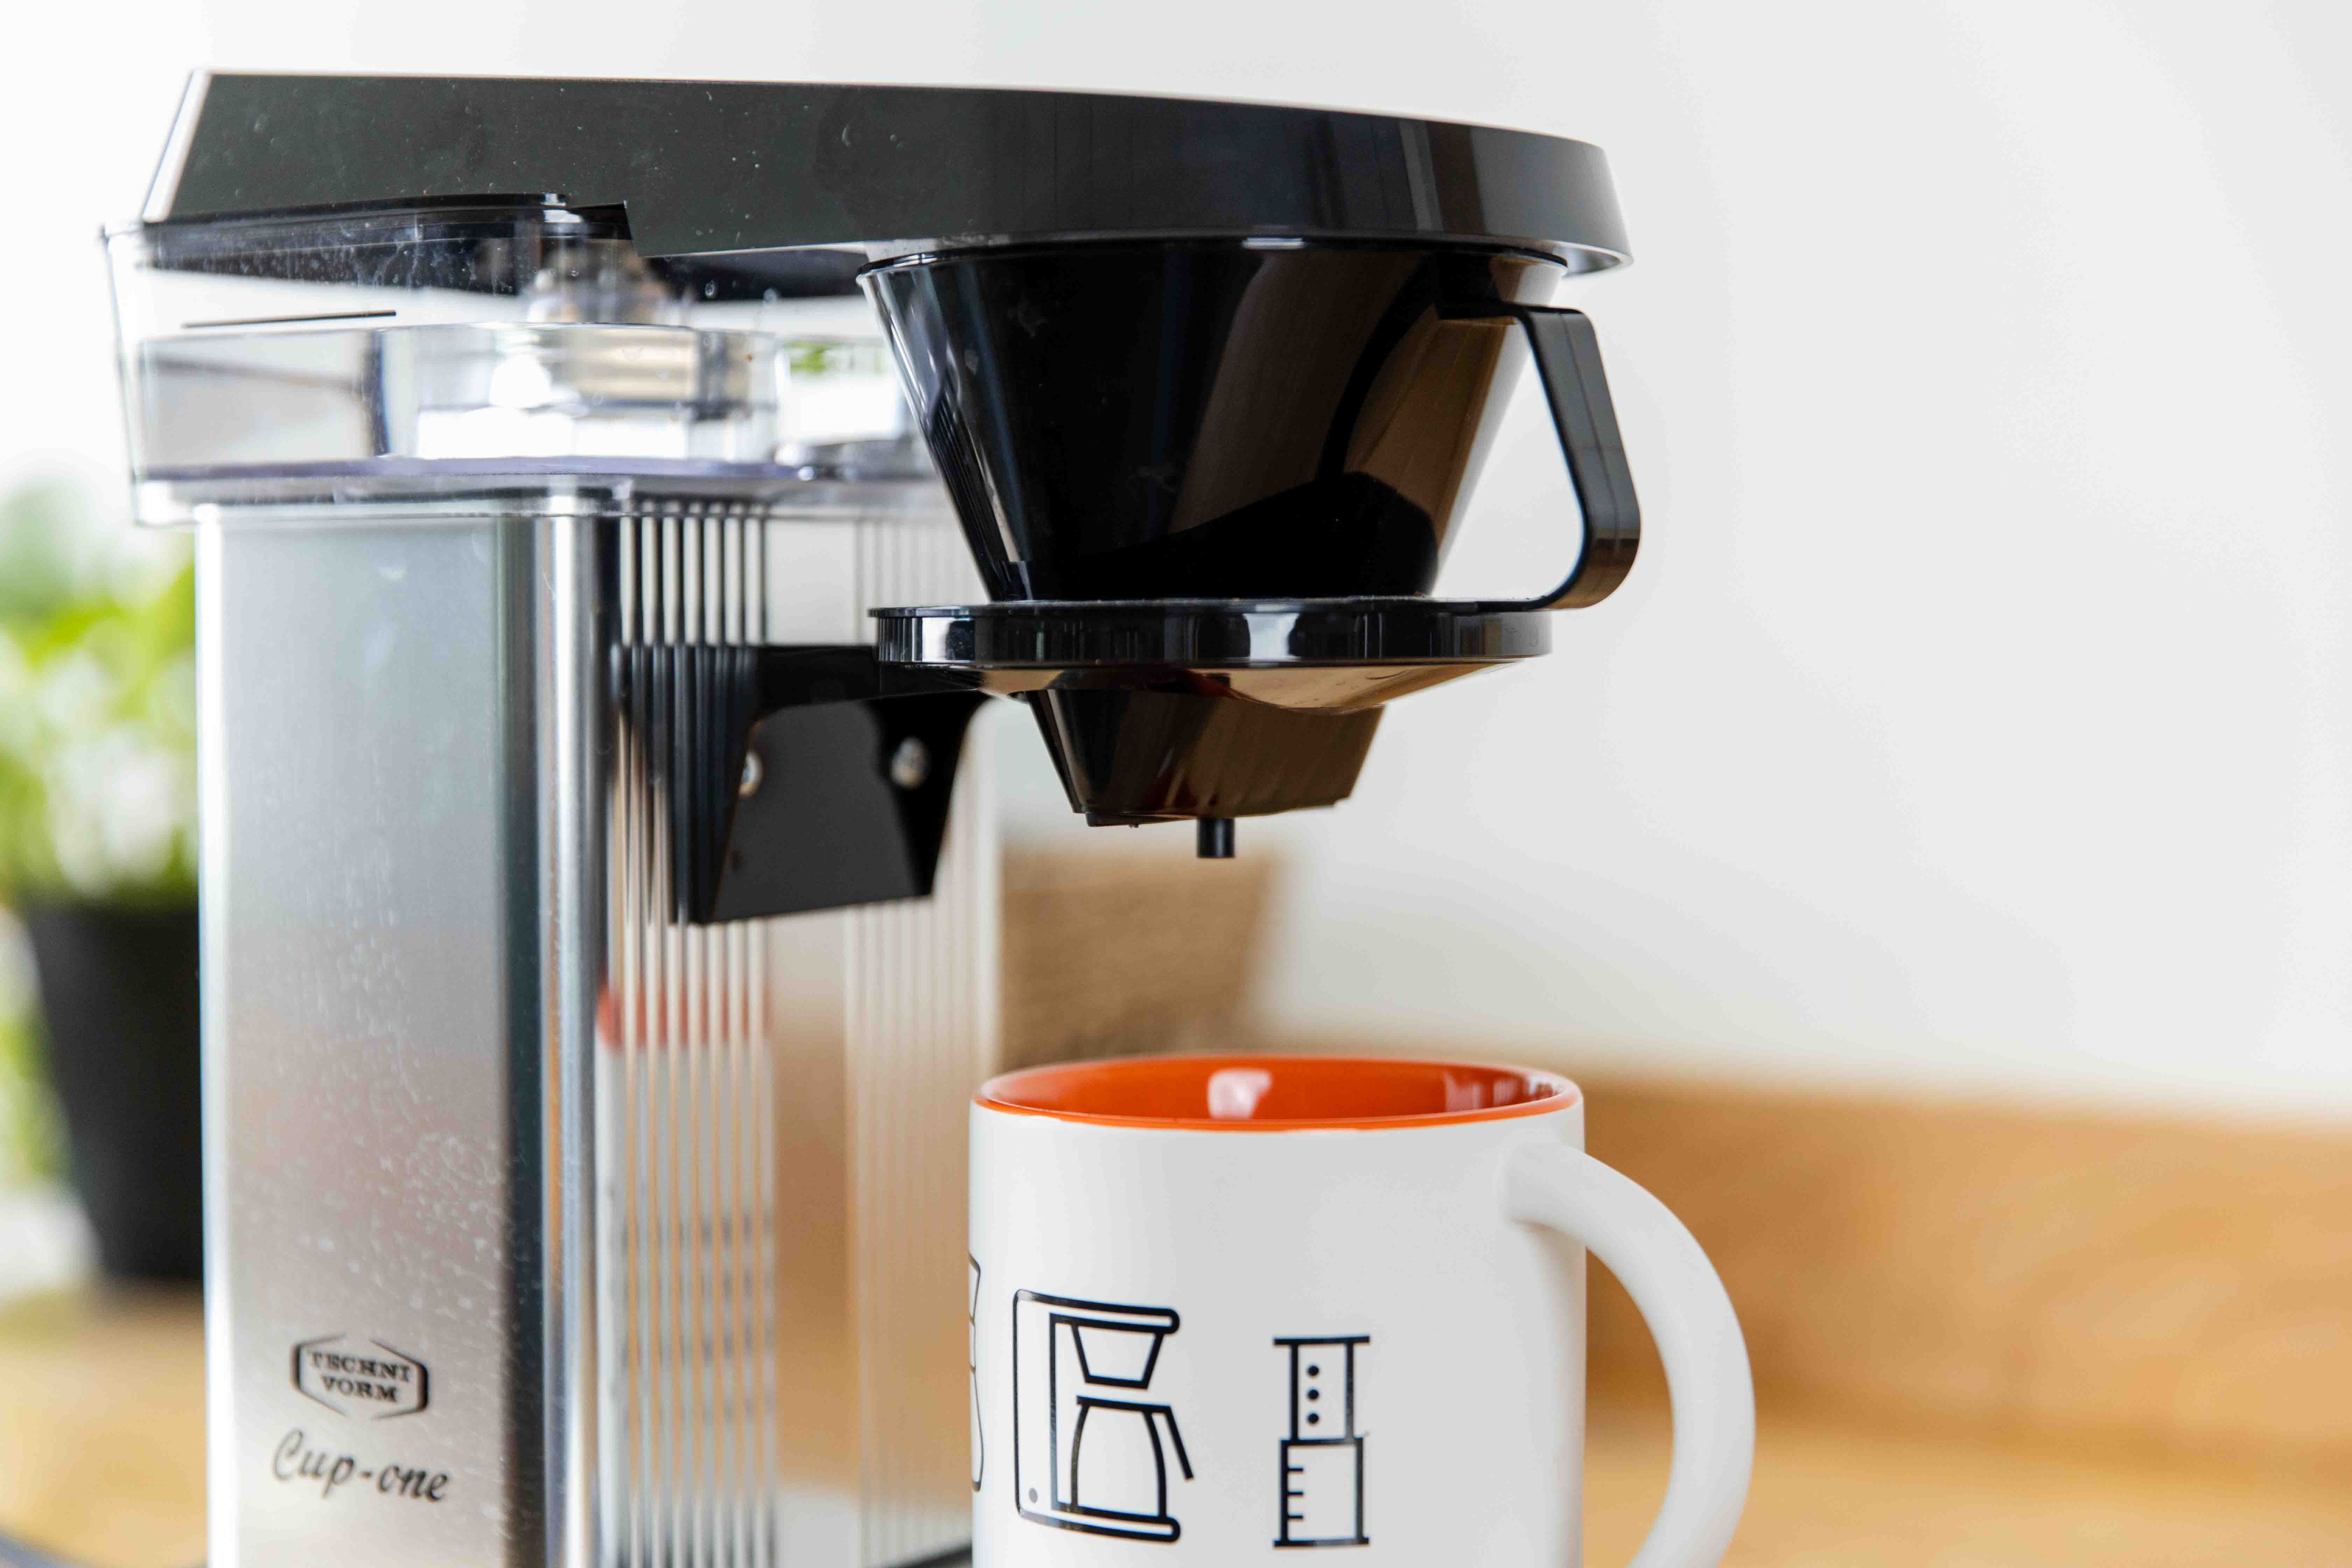 PPP Coffee - Introducing Moccamaster Cup-One: The smartest